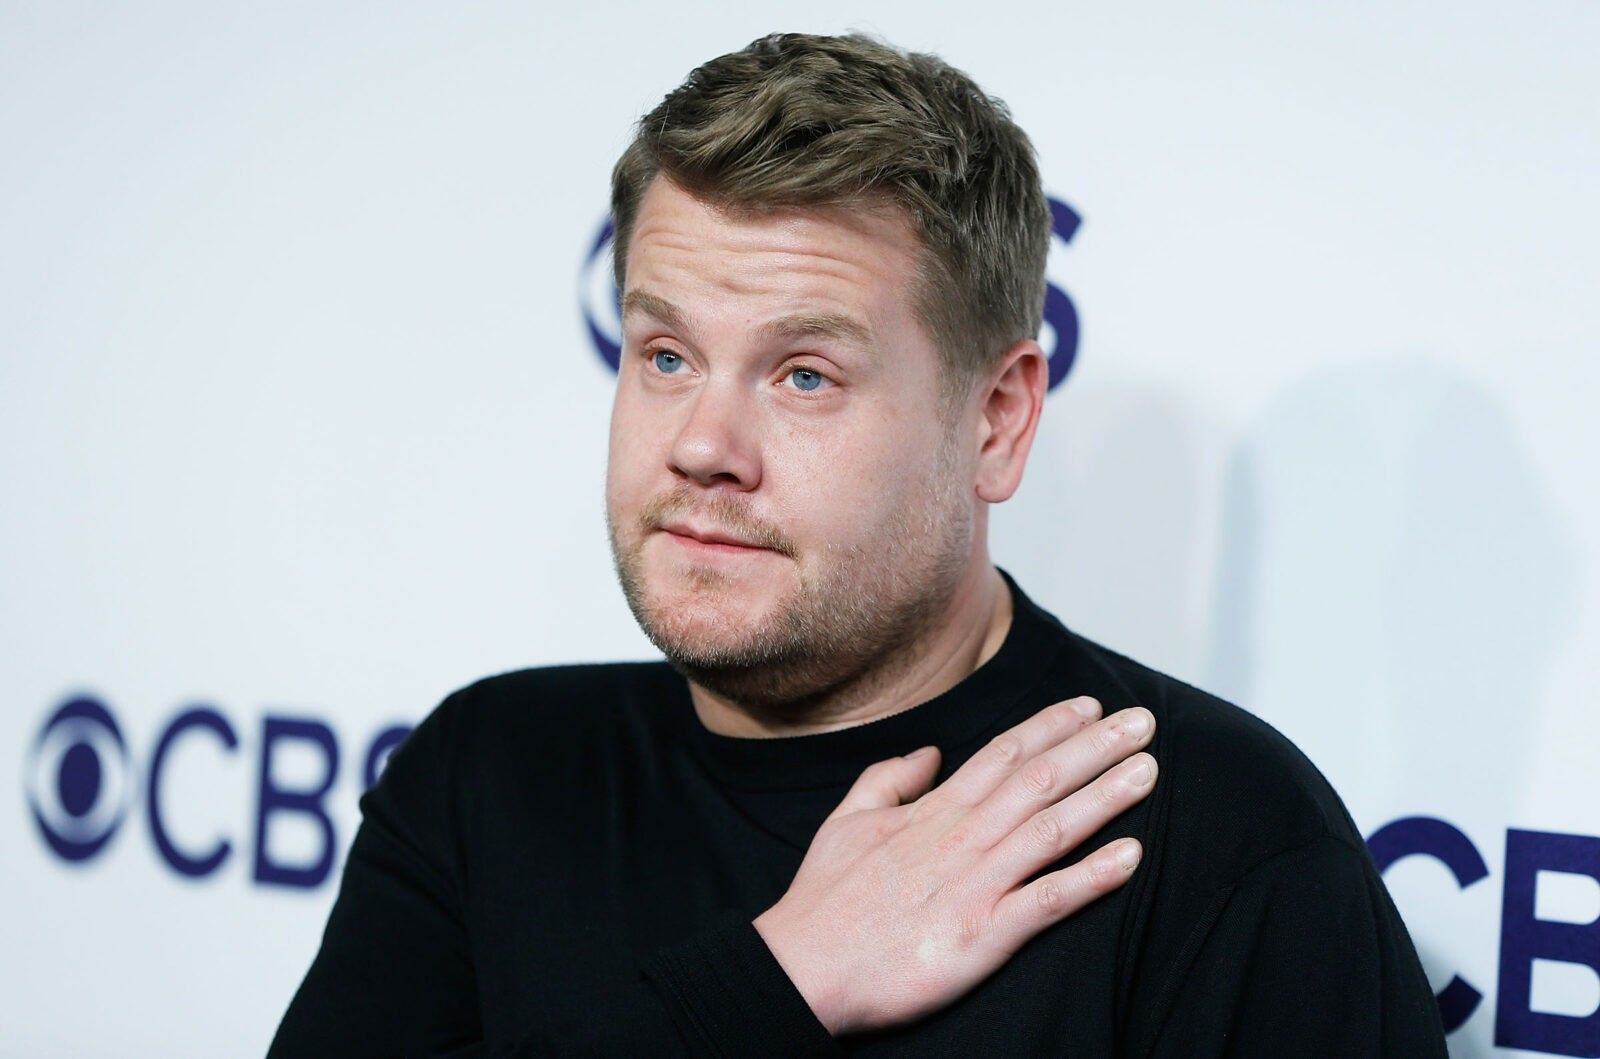 James Corden Reminds Us That Shame Isn't the Answer - Goalcast